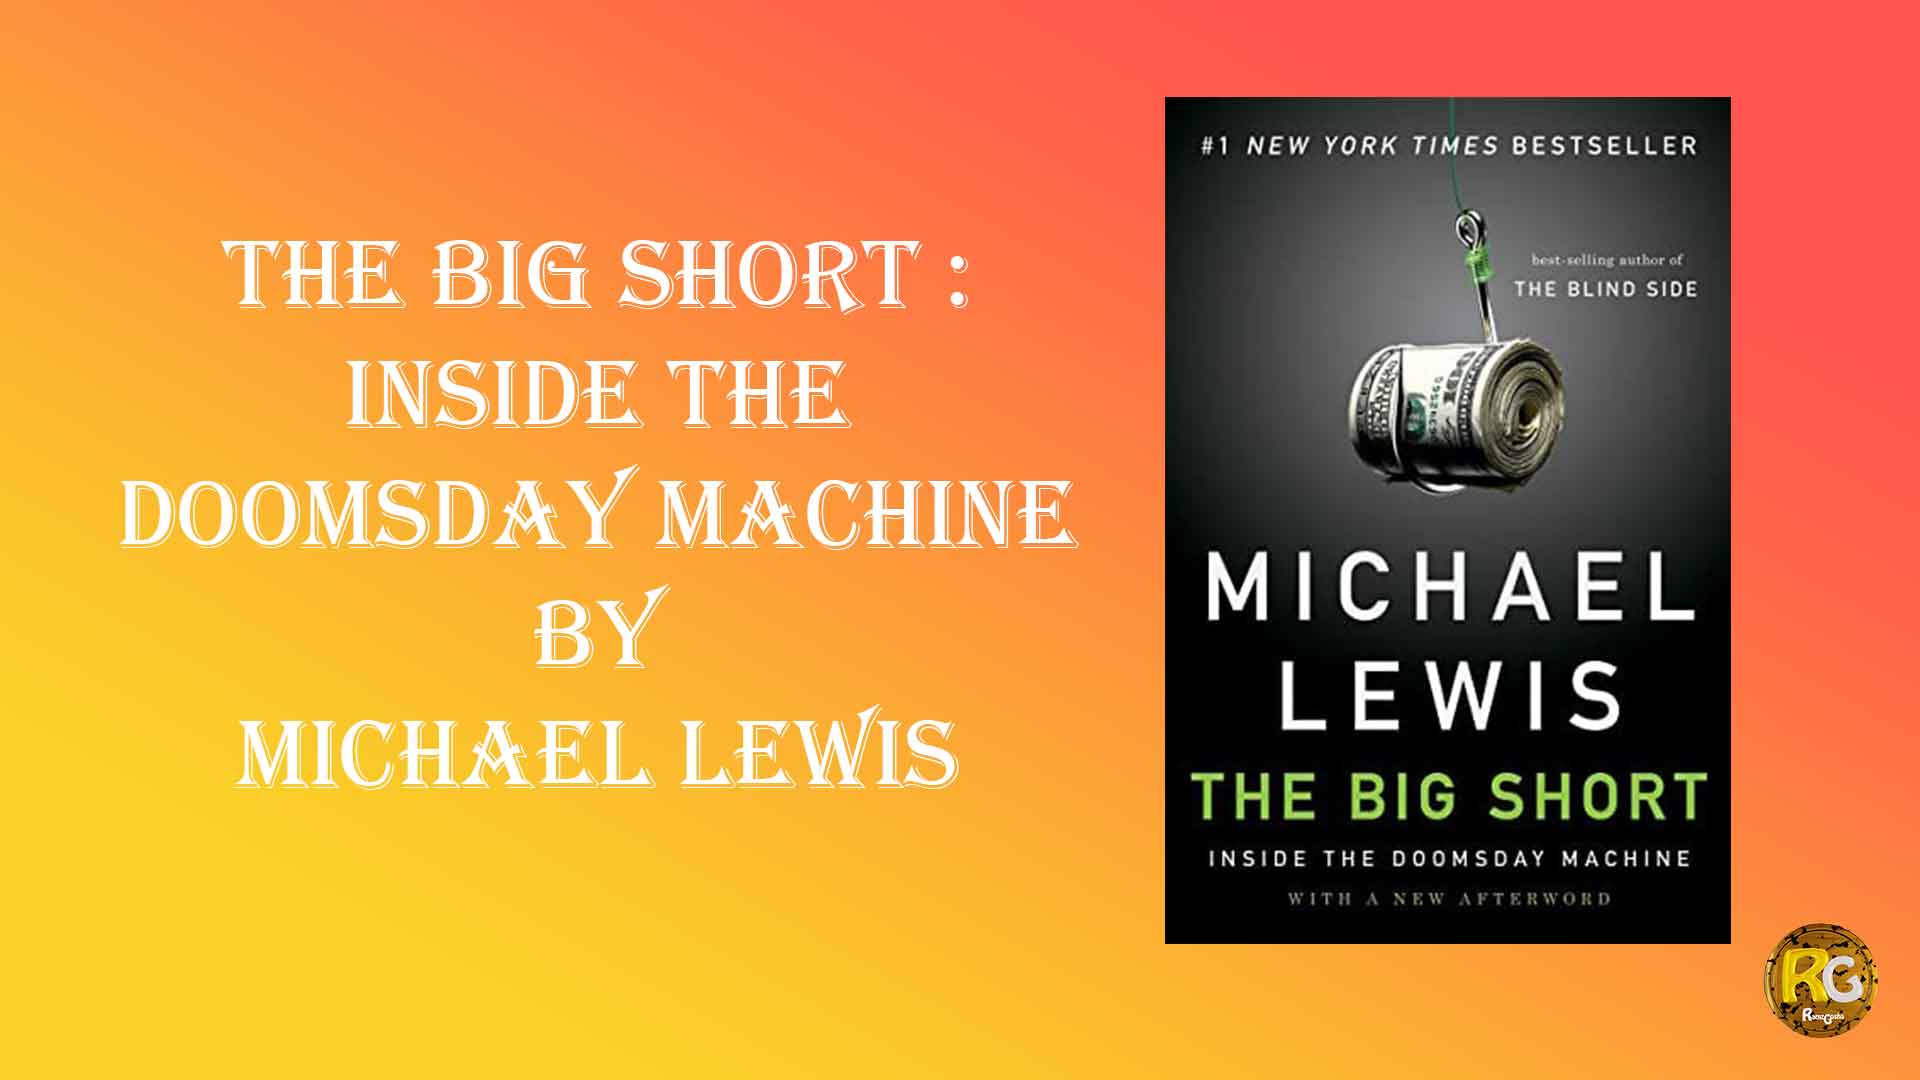 The Big Short : Inside the Doomsday Machine by Michael Lewis